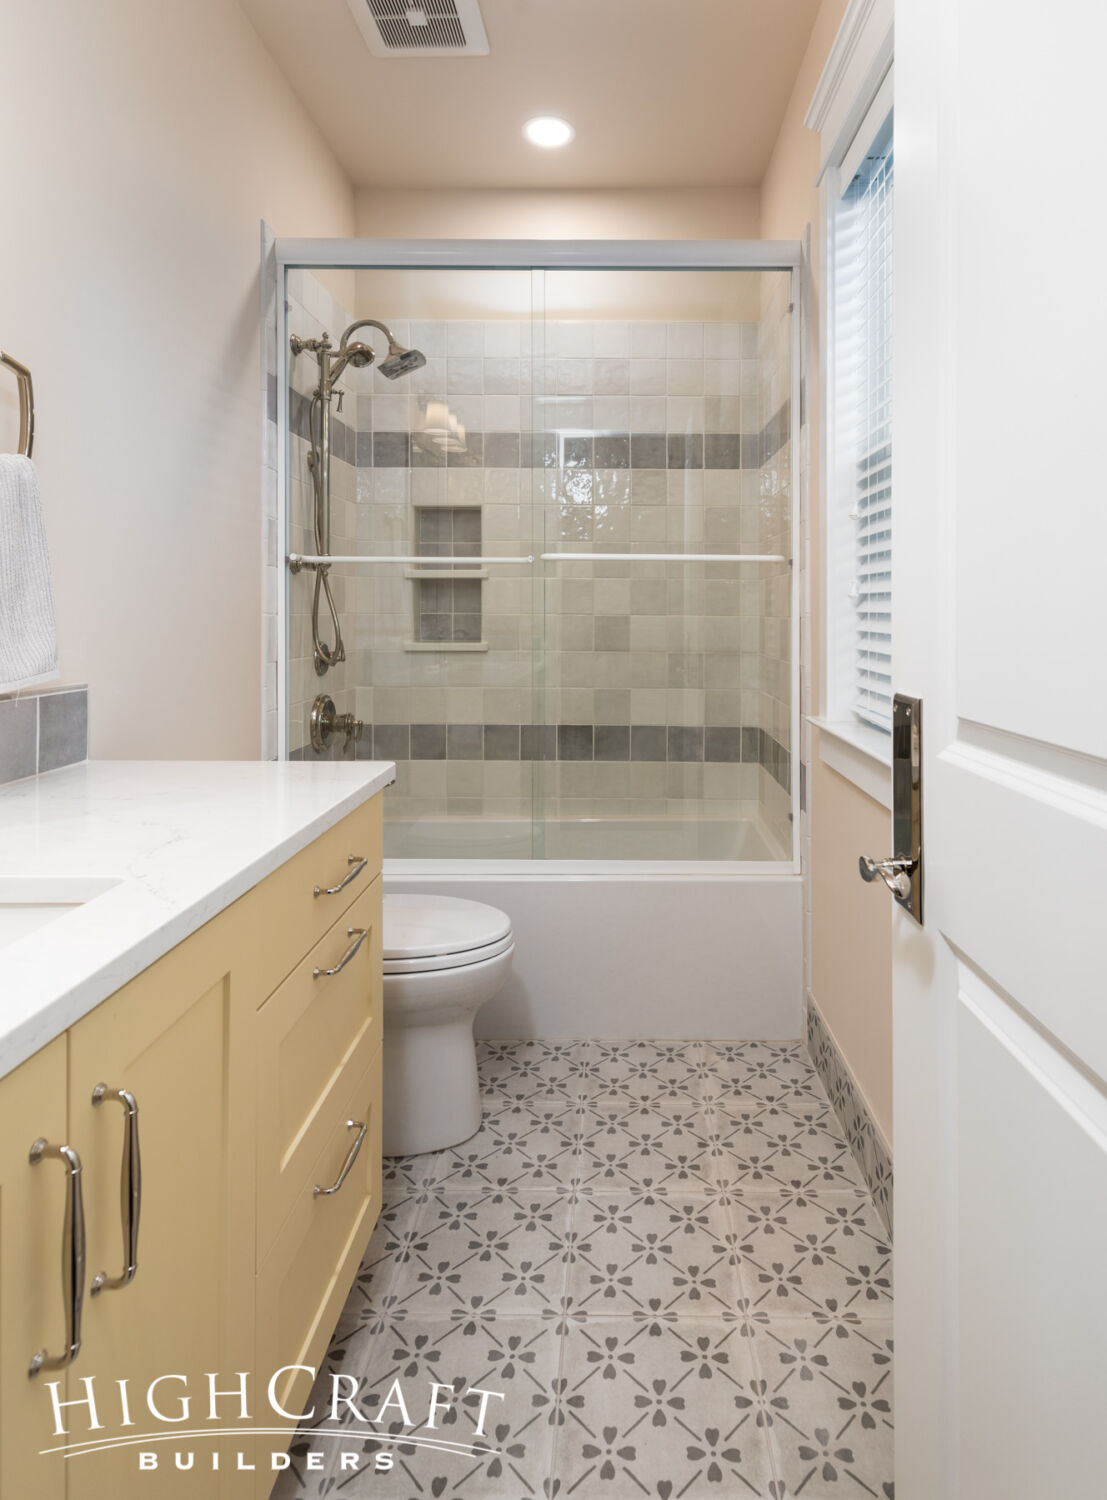 Eclectic-Remodel-in-Old-Town-Guest-Bath-with-Transistional-Patterned-Floor-Tile